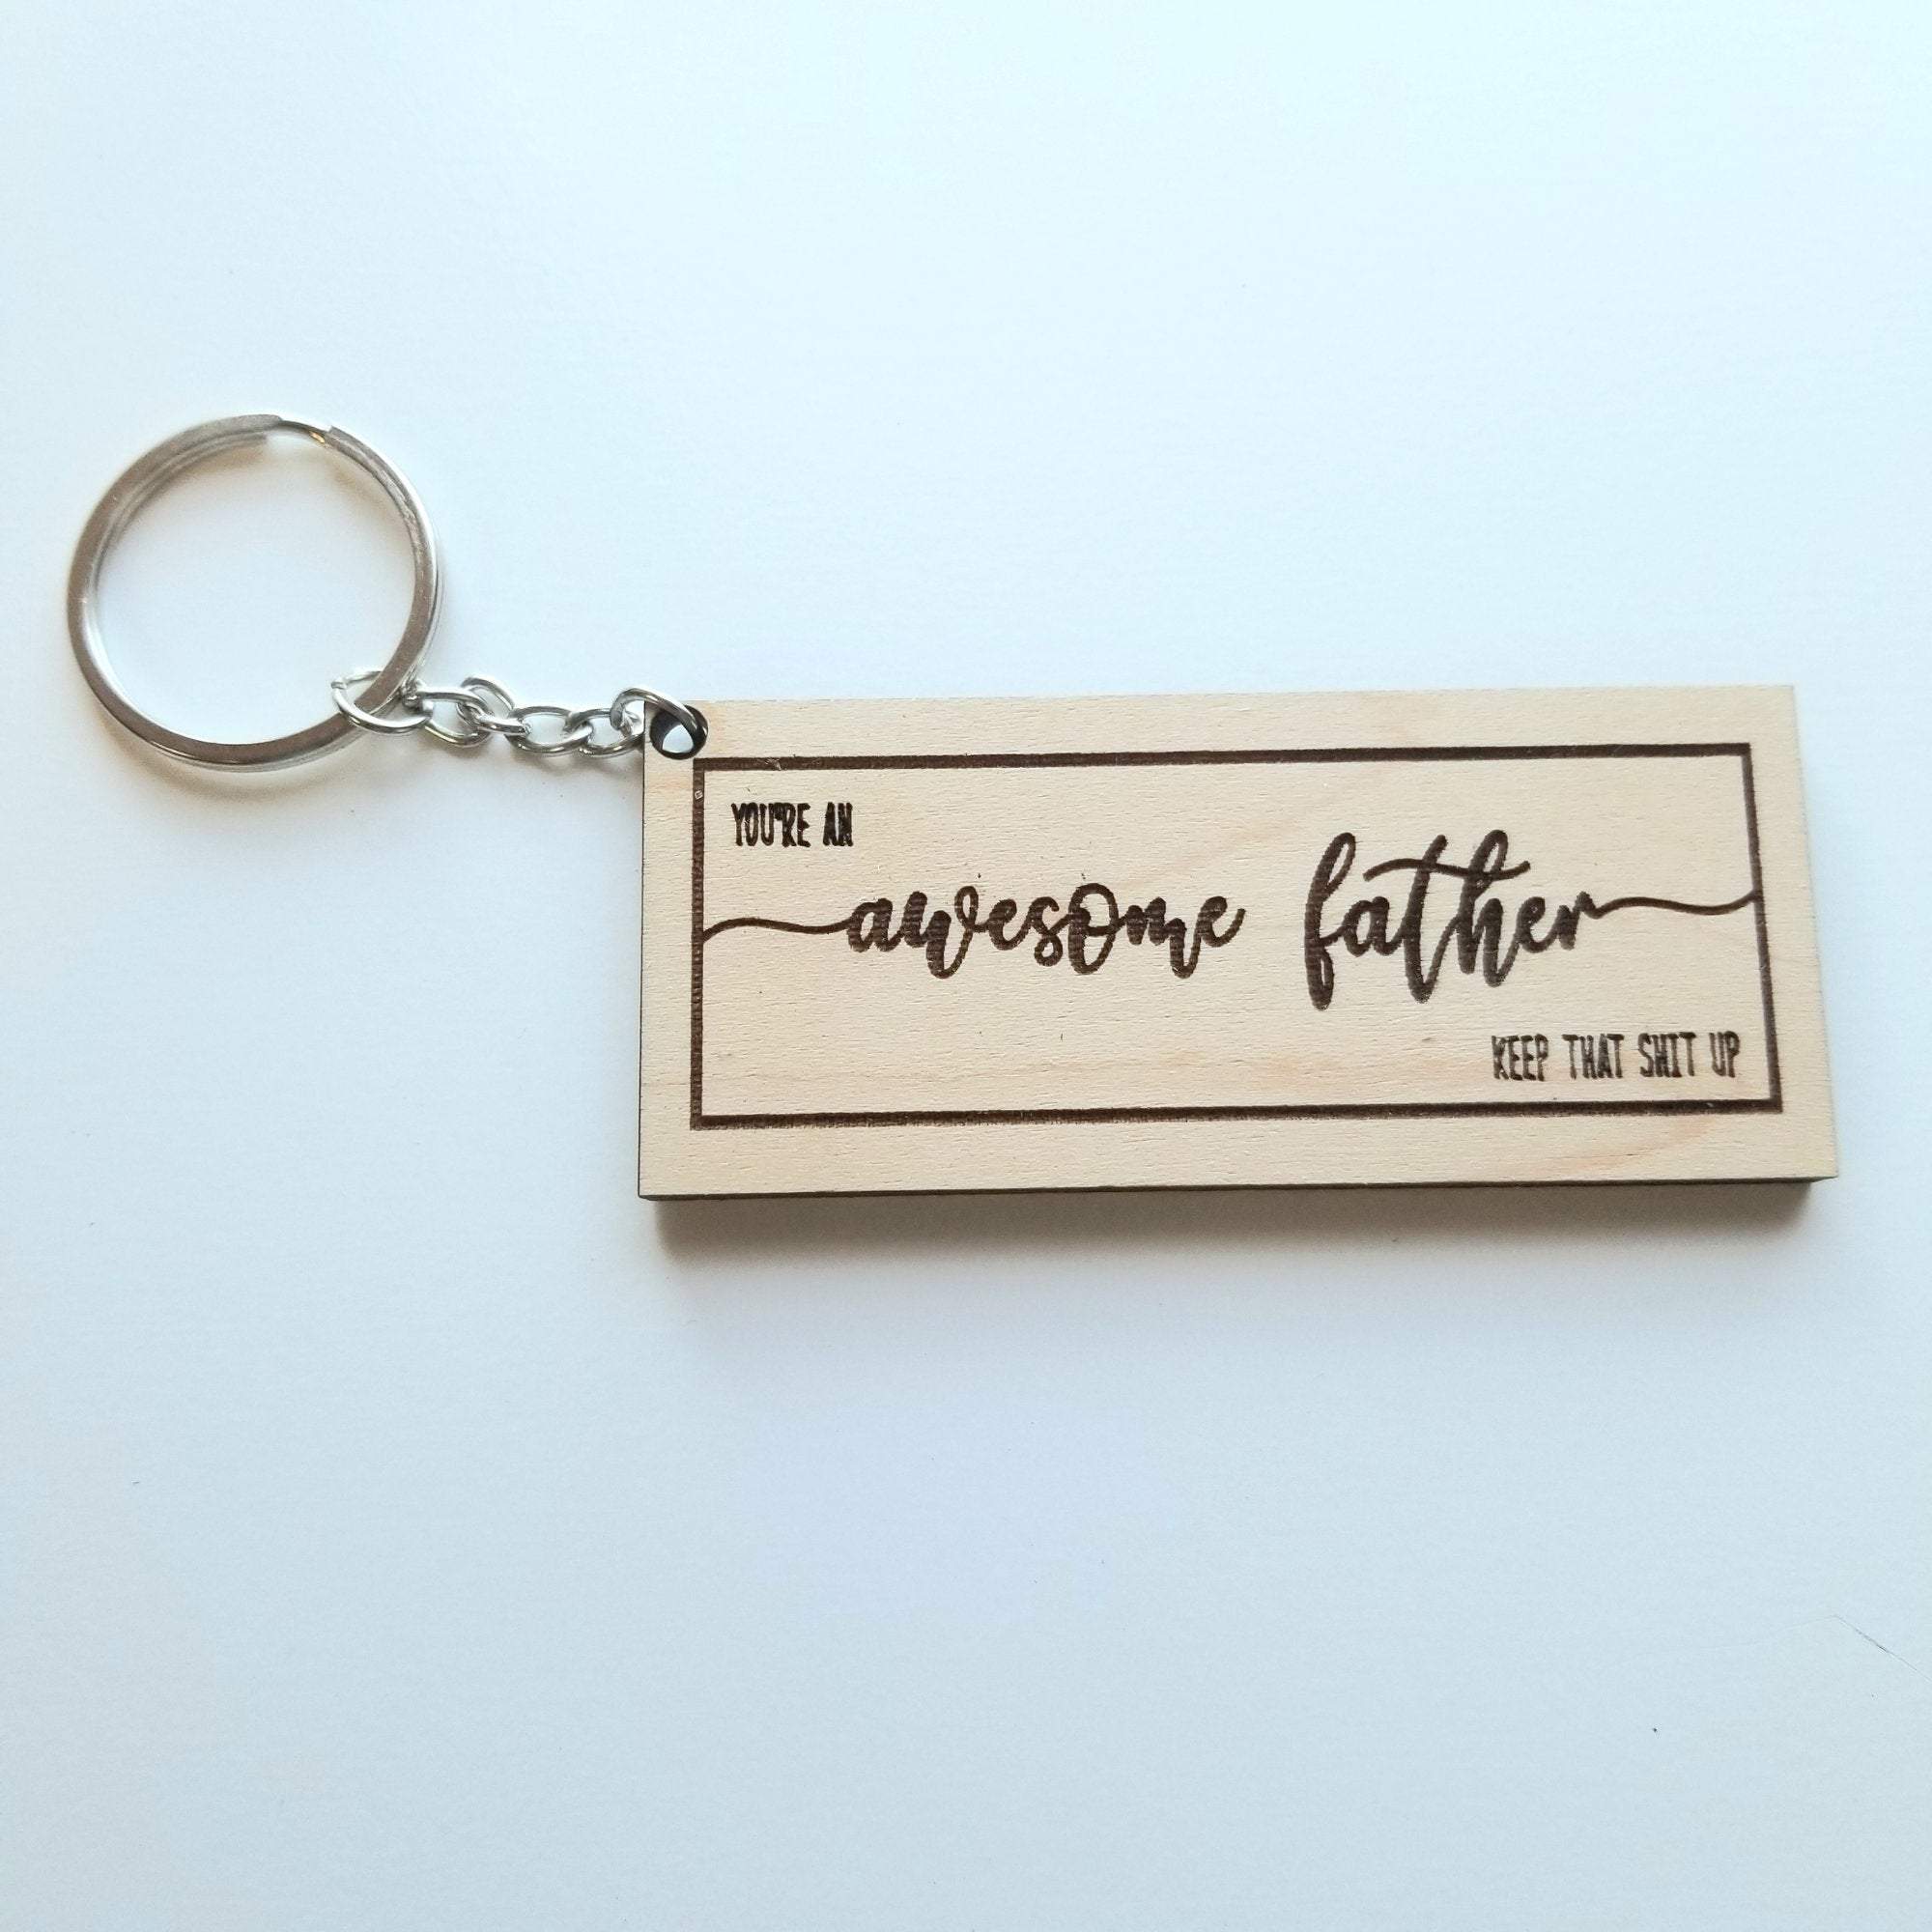 Personalized Awesome Father Keep That Shit Up Keychain - Designodeal